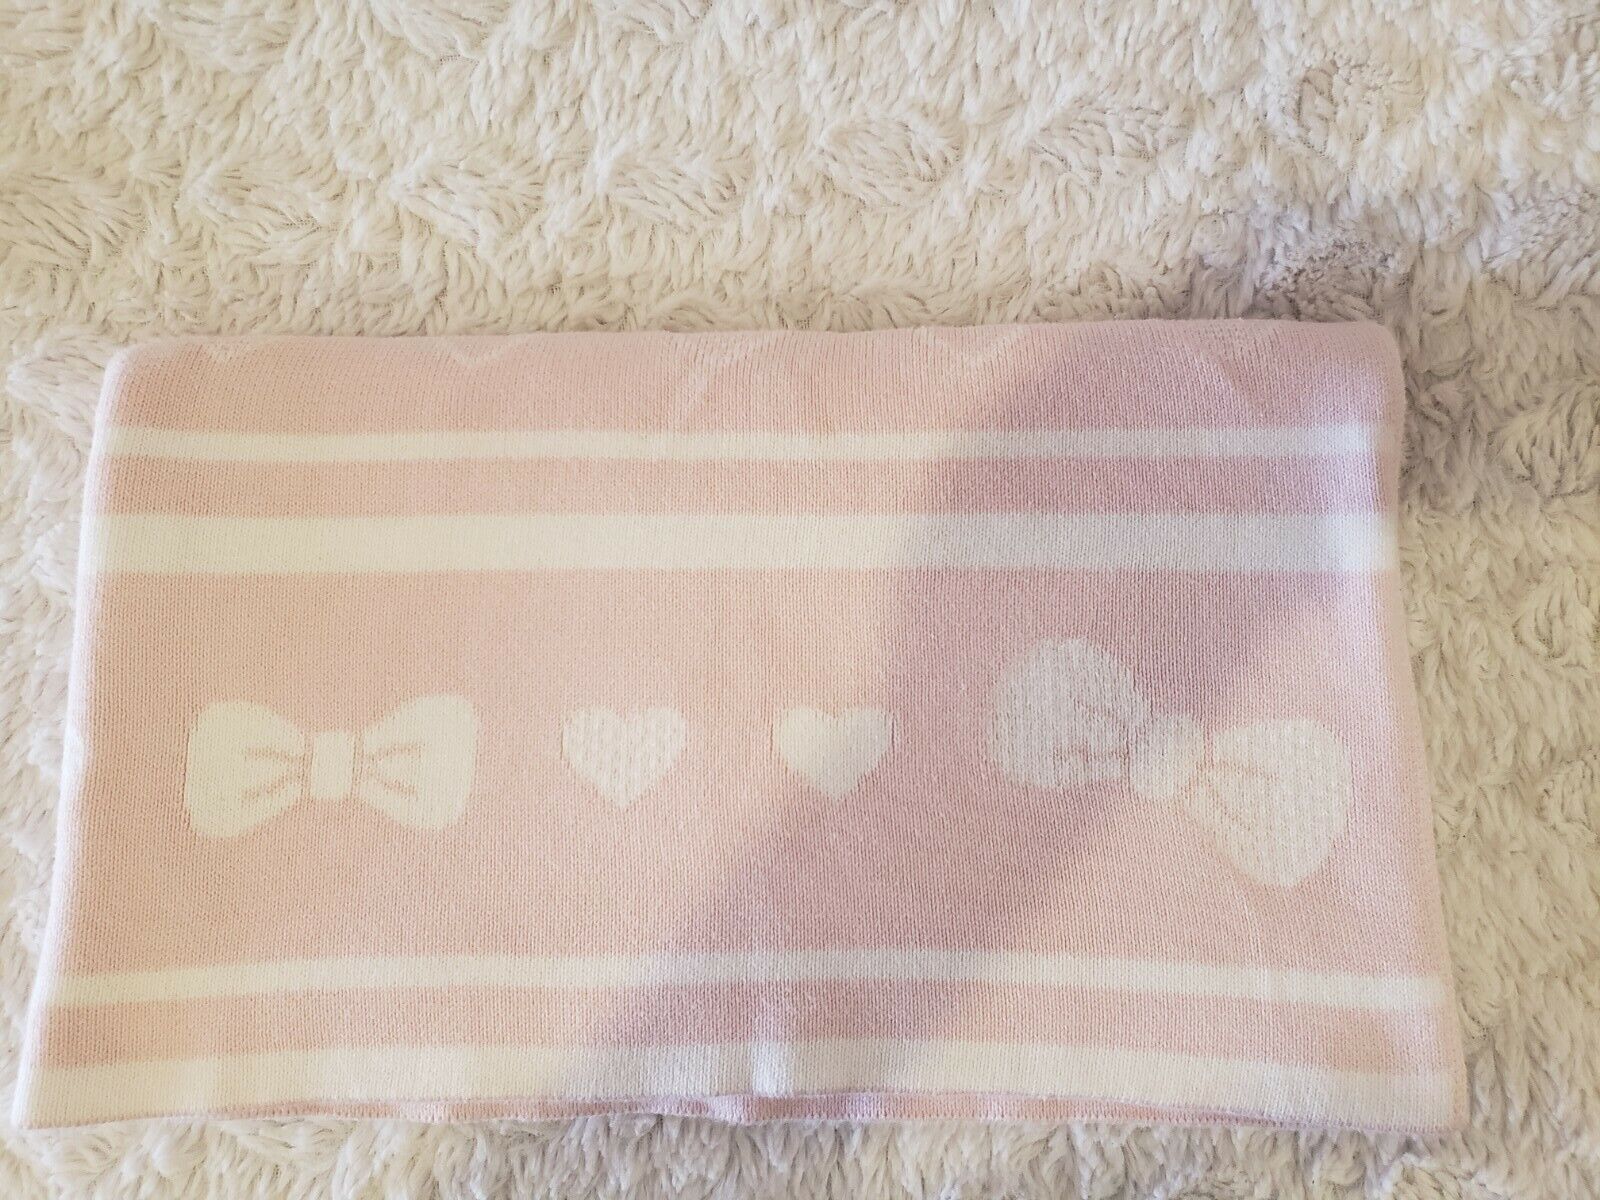 KISSY KISSY BABY GIRL PINK 37'' x 30'' BOWS HEARTS STRIPED BLANKET COTTON 